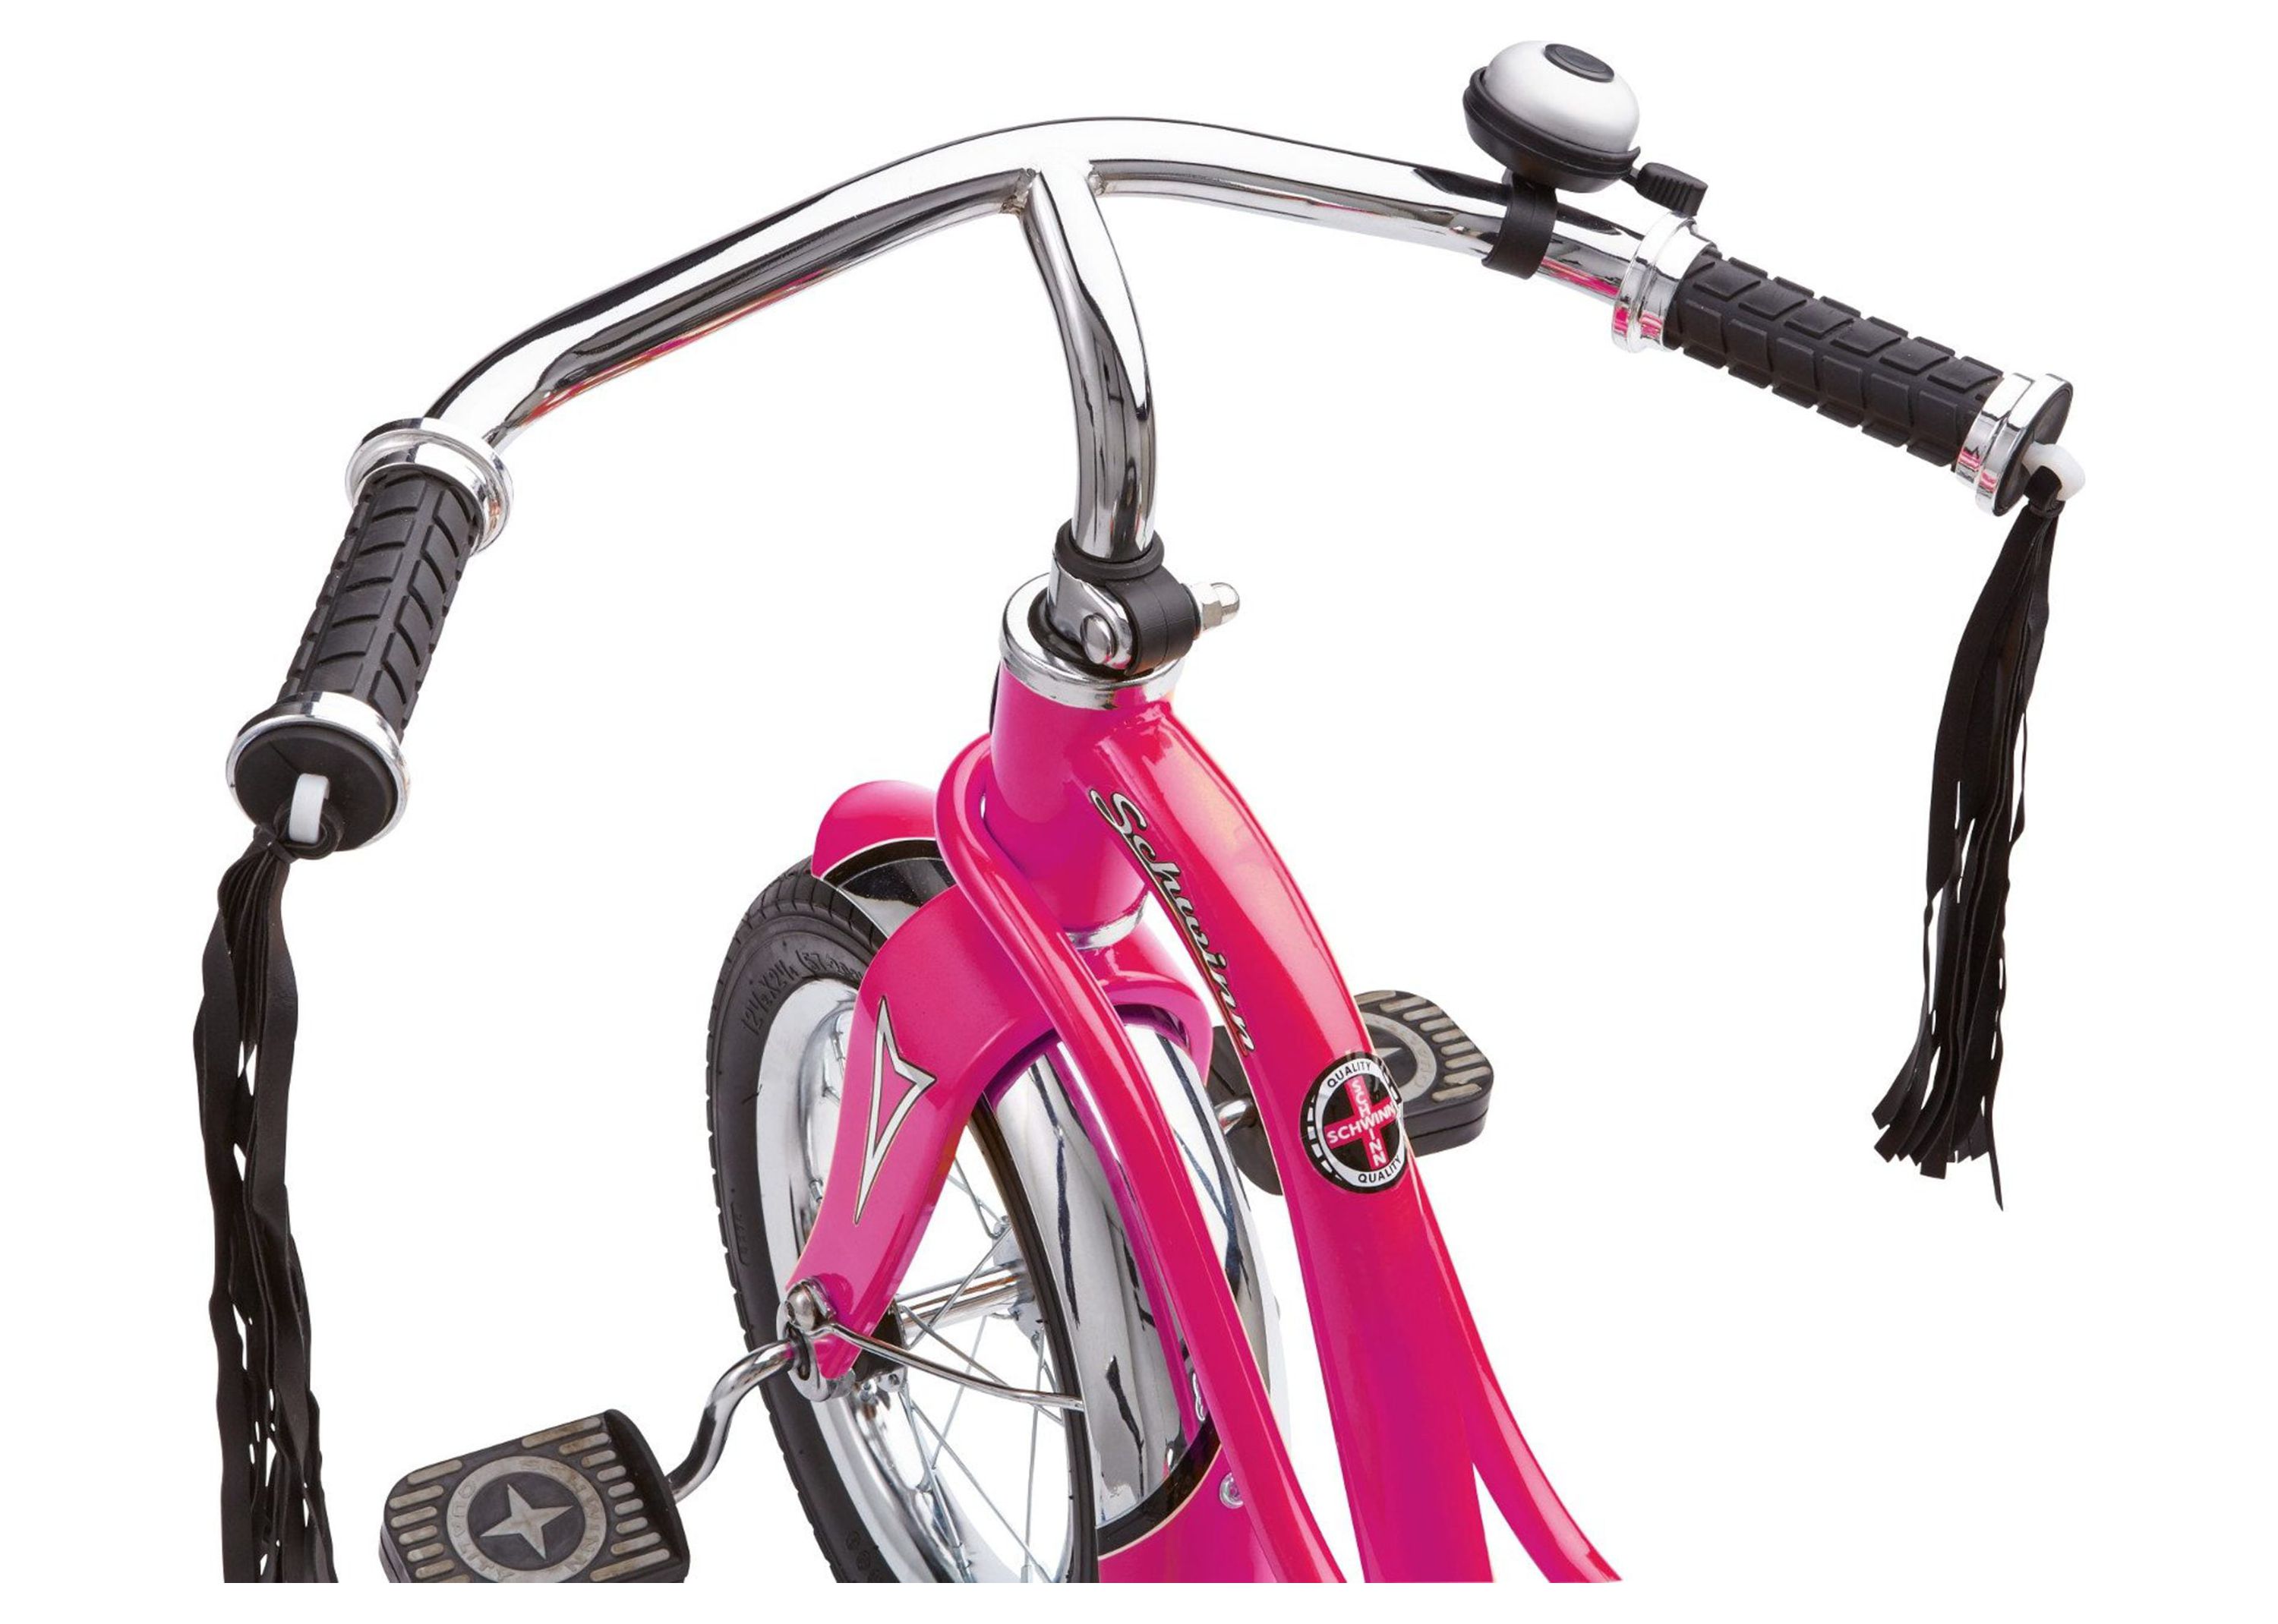 Schwinn Roadster Retro-Style Tricycle, 12-inch front wheel, ages 2 - 4, hot pink - image 4 of 7